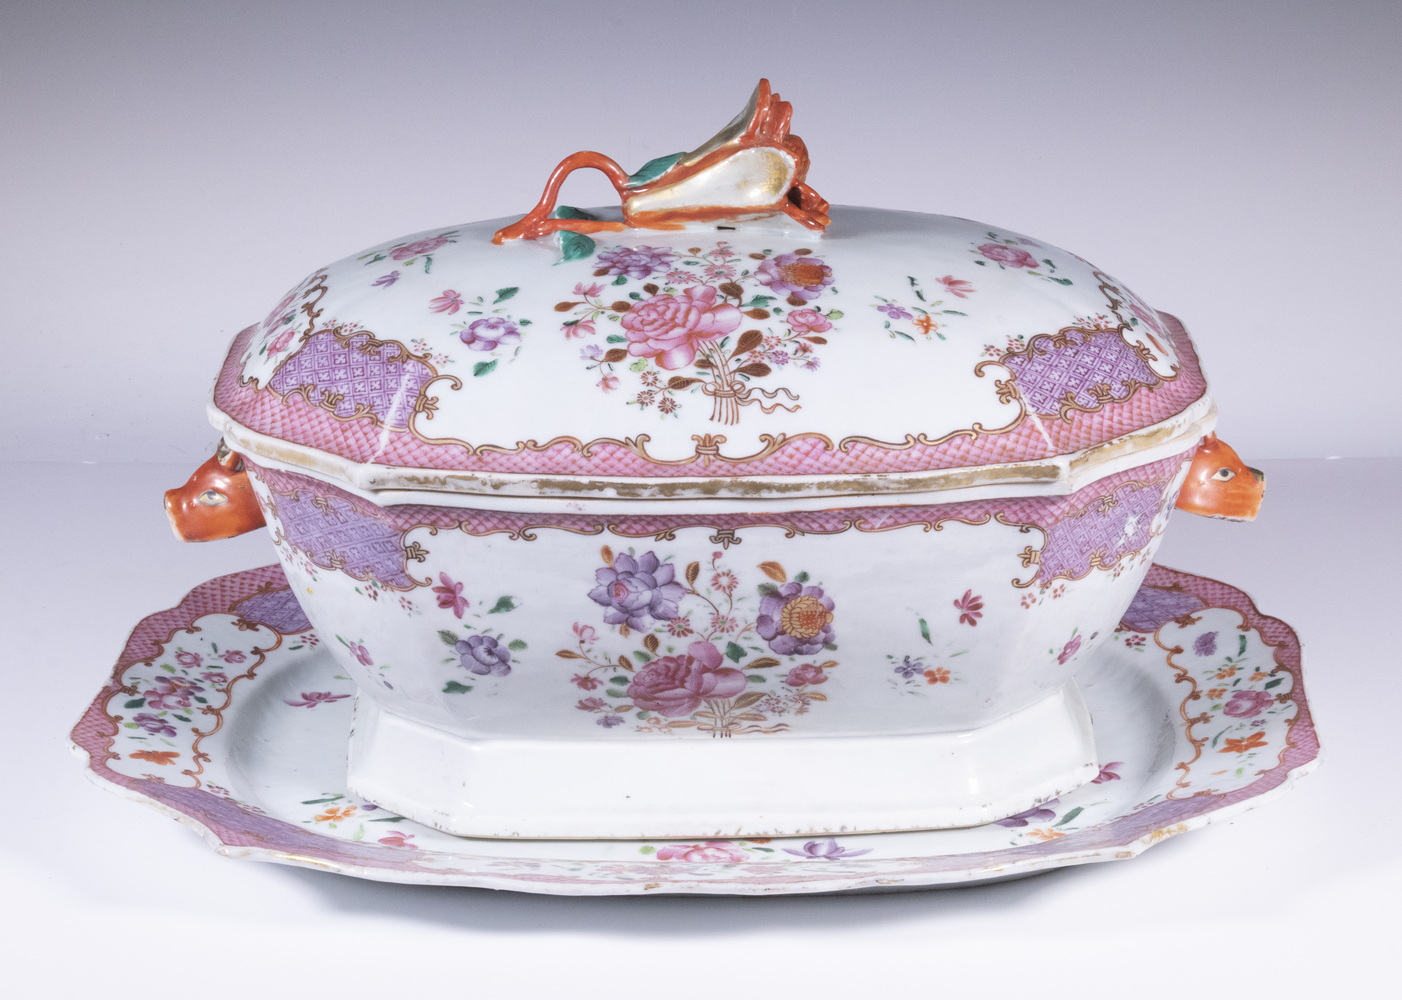 CHINESE EXPORT PORCELAIN TUREEN